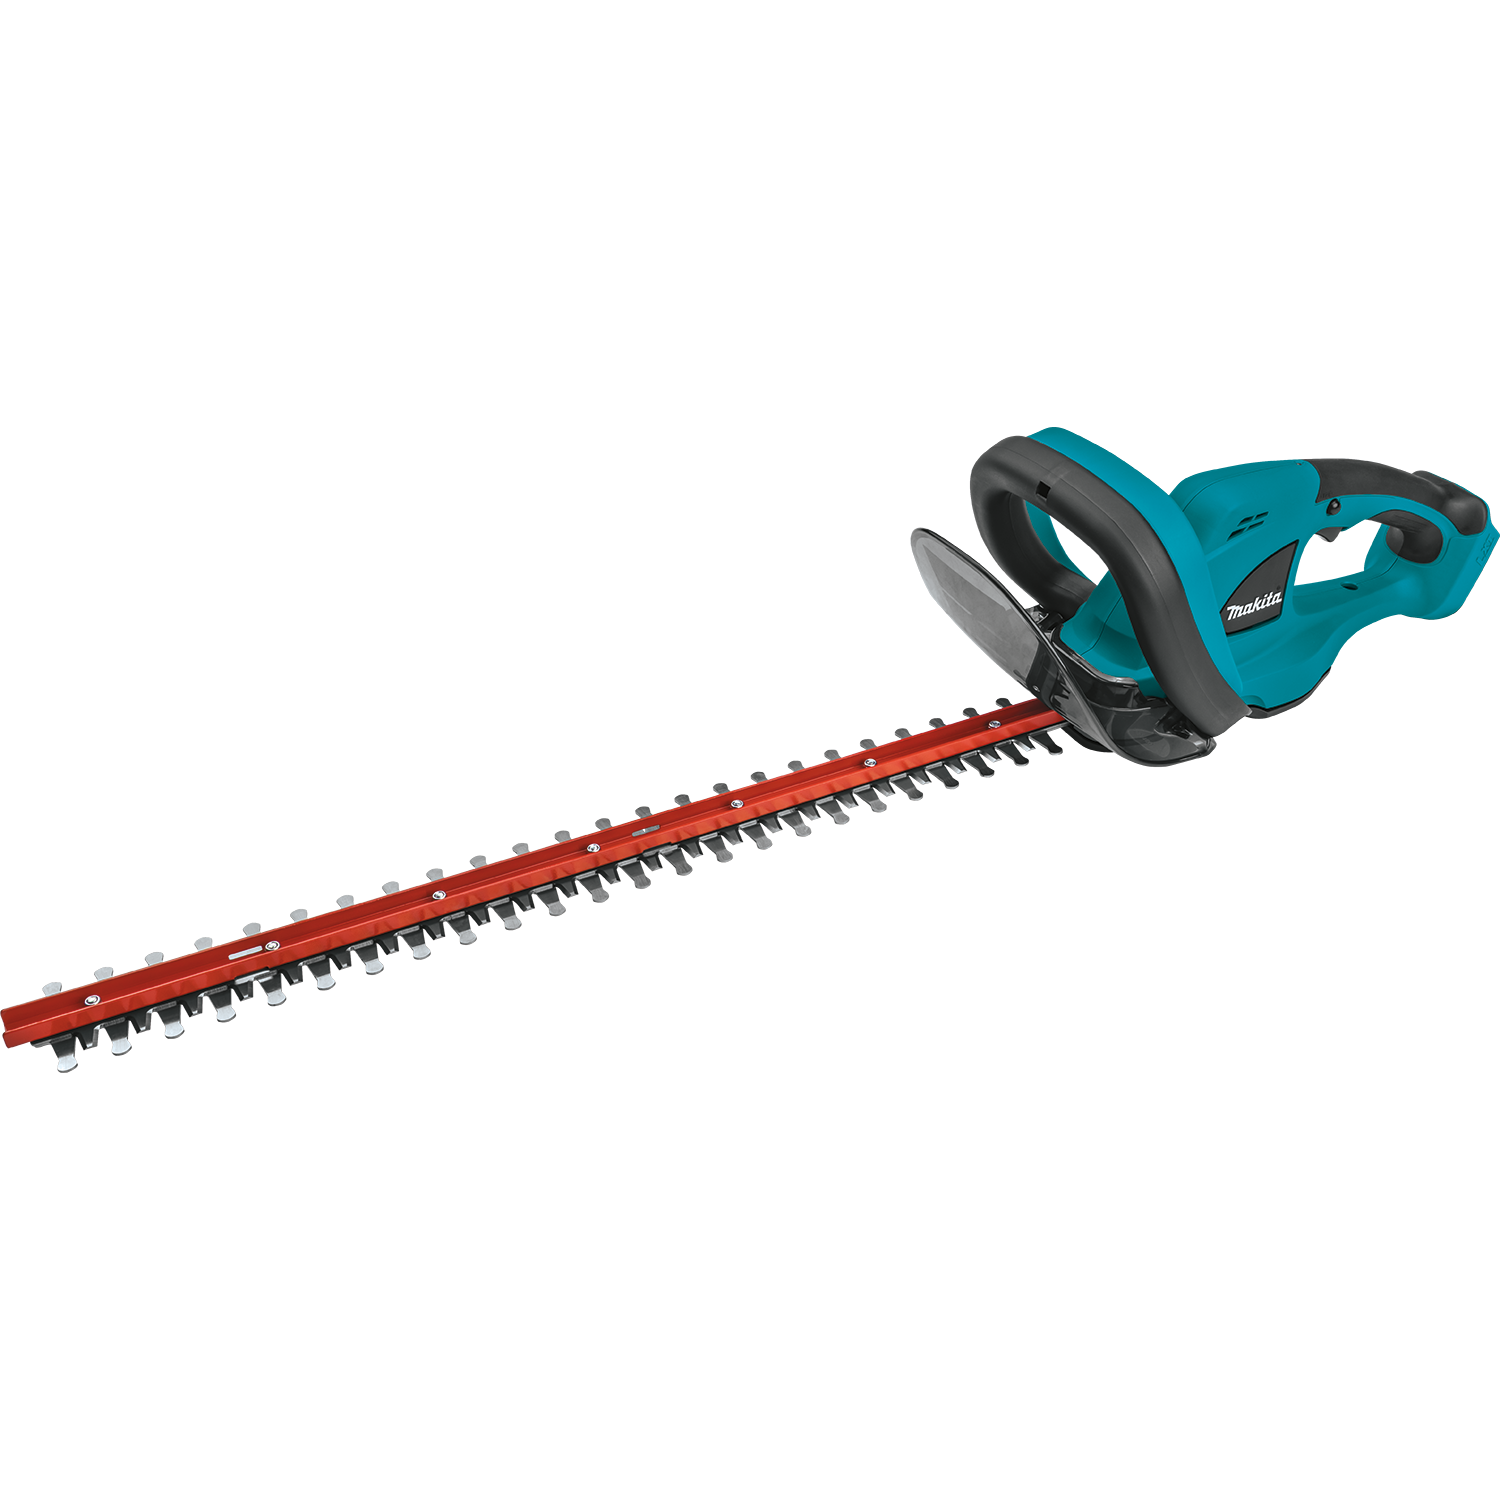 Makita XHU02Z-R 18V LXT Lithium?Ion Cordless 22 in. Hedge Trimmer, Tool Only, Reconditioned